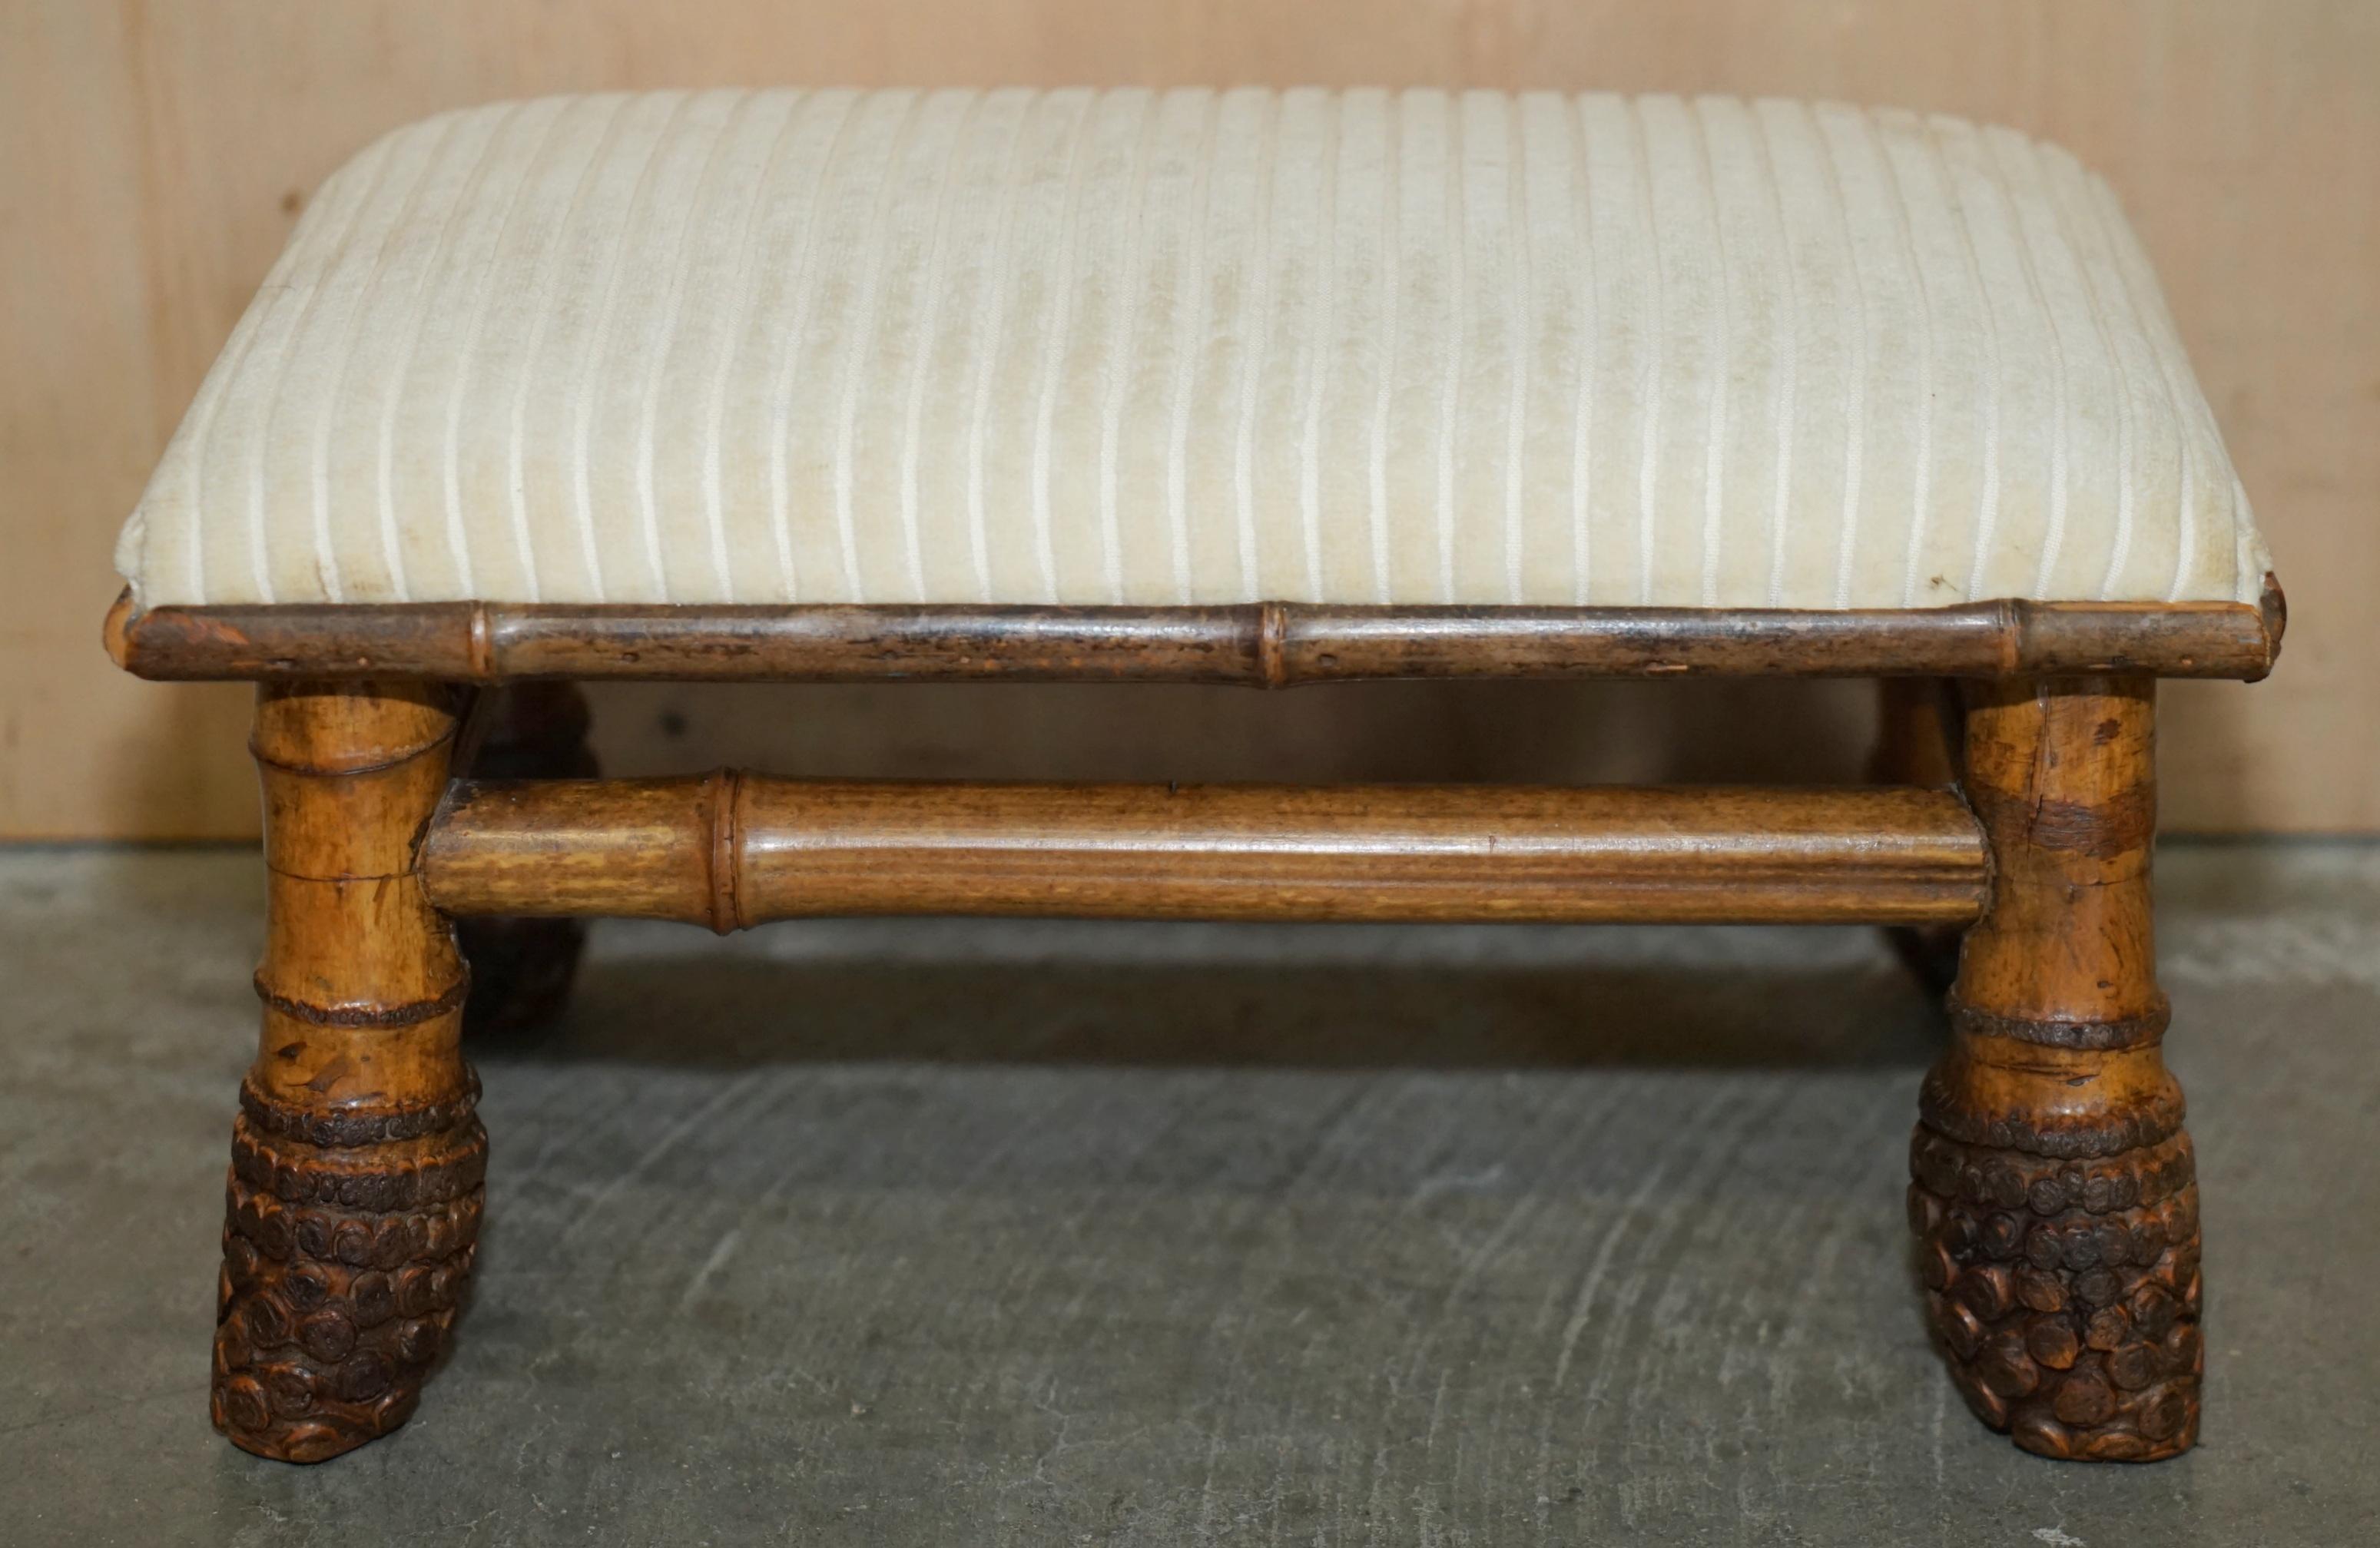 Royal House Antiques

Royal House Antiques is delighted to offer for sale this super rare and highly collectable Aesthetic Movement Chinese hand-carved bamboo footstool 

Please note the delivery fee listed is just a guide, it covers within the M25